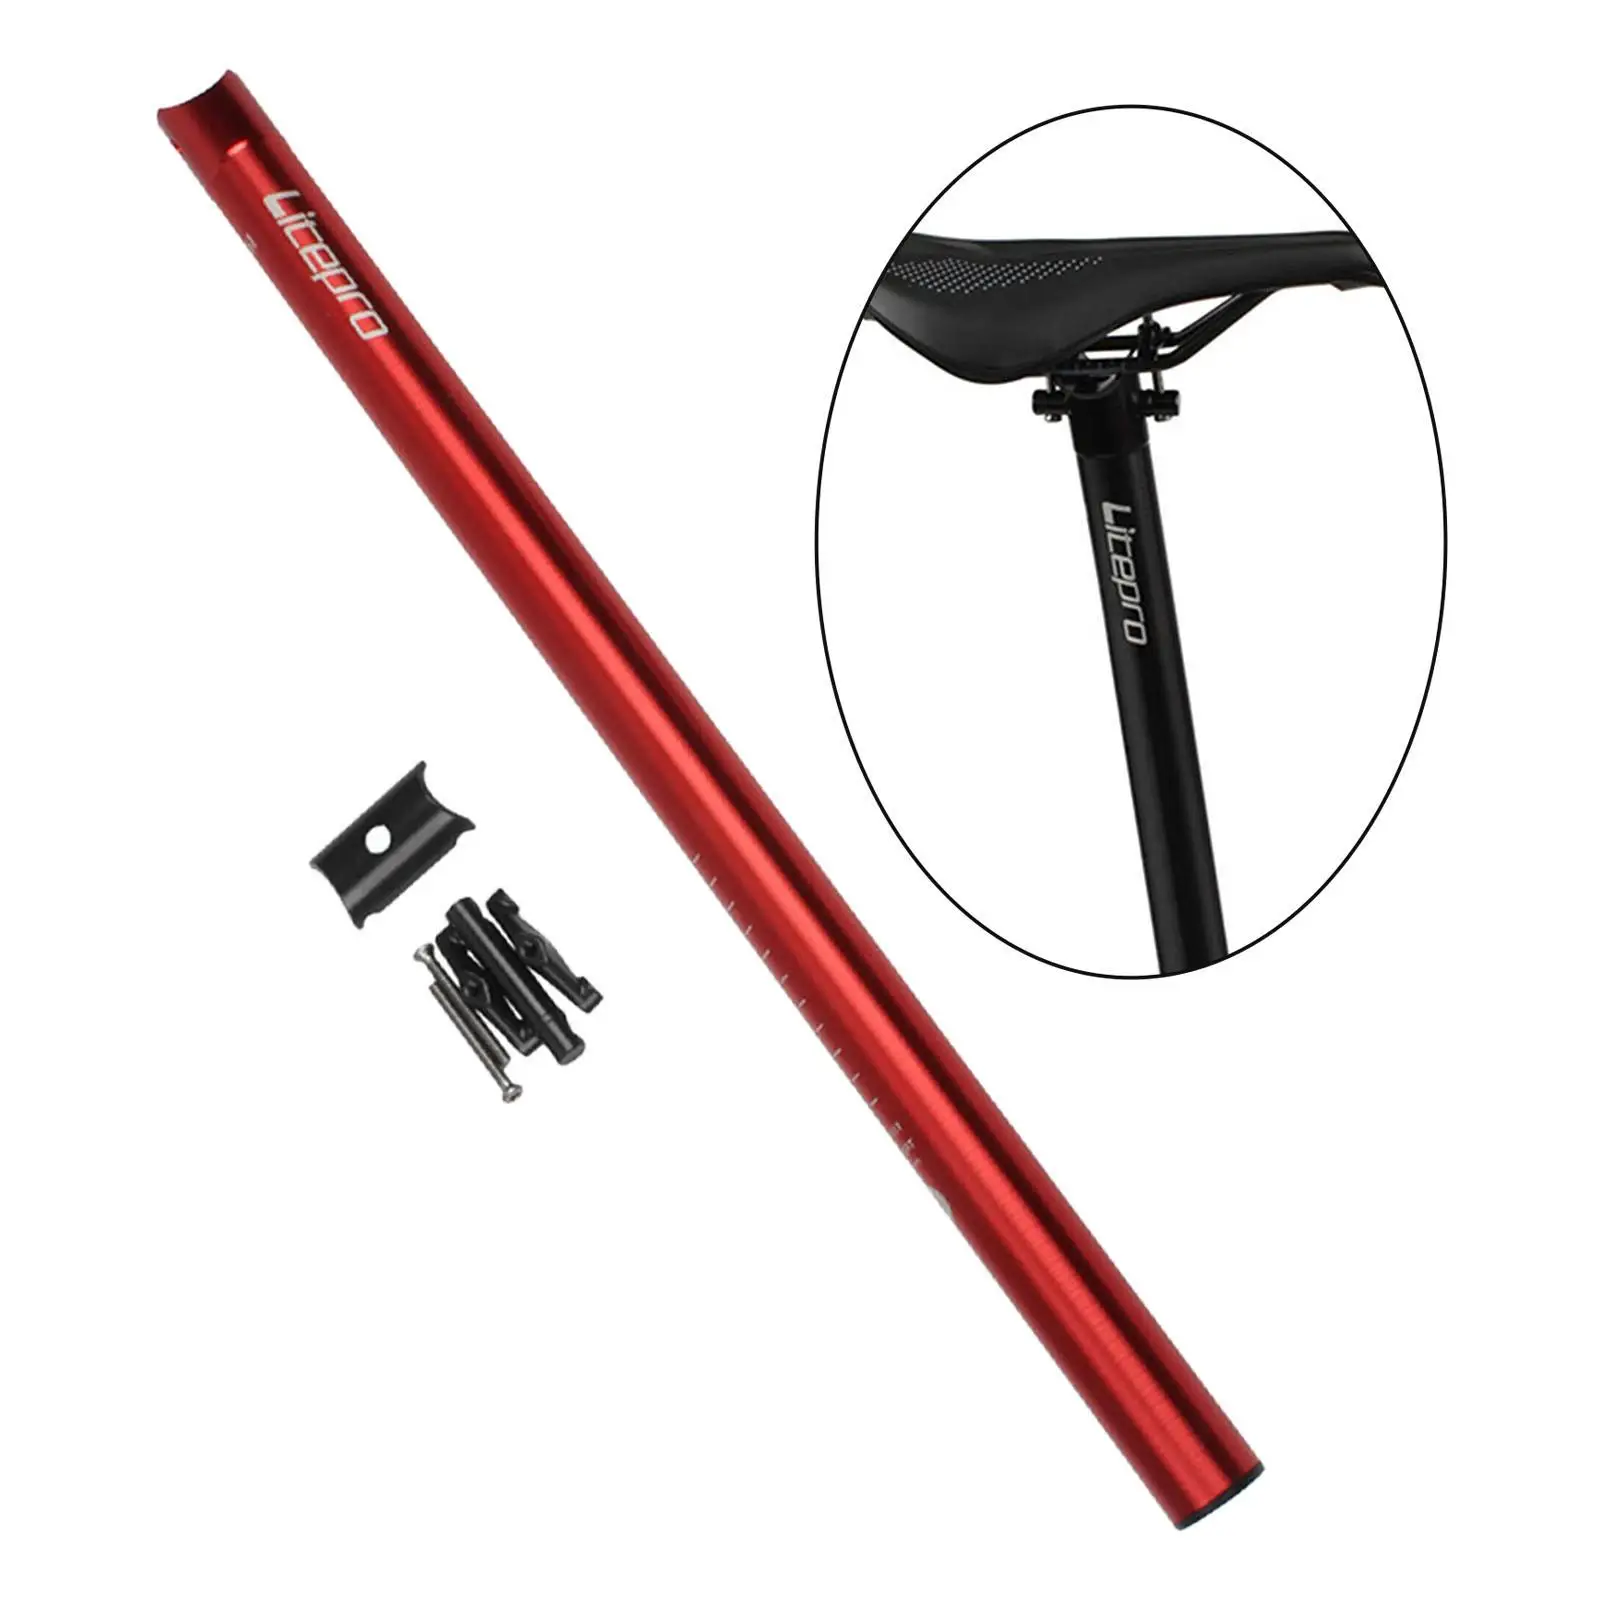 Folding Bike Aluminum Alloy Seat Post Super Light Seat Tube Rod Seatpost 31.8* for Cycling Accessories